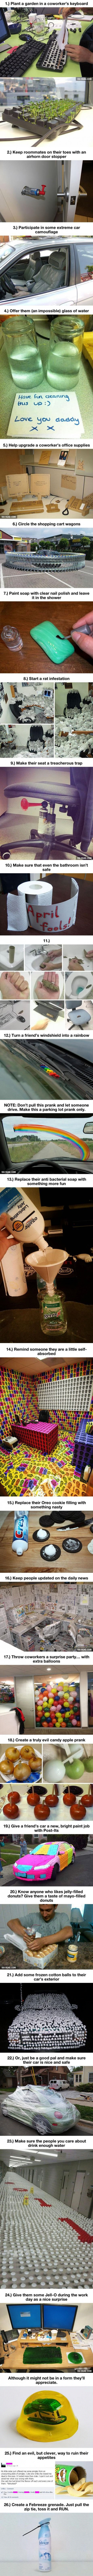 April Fools Pranks You Need To Try